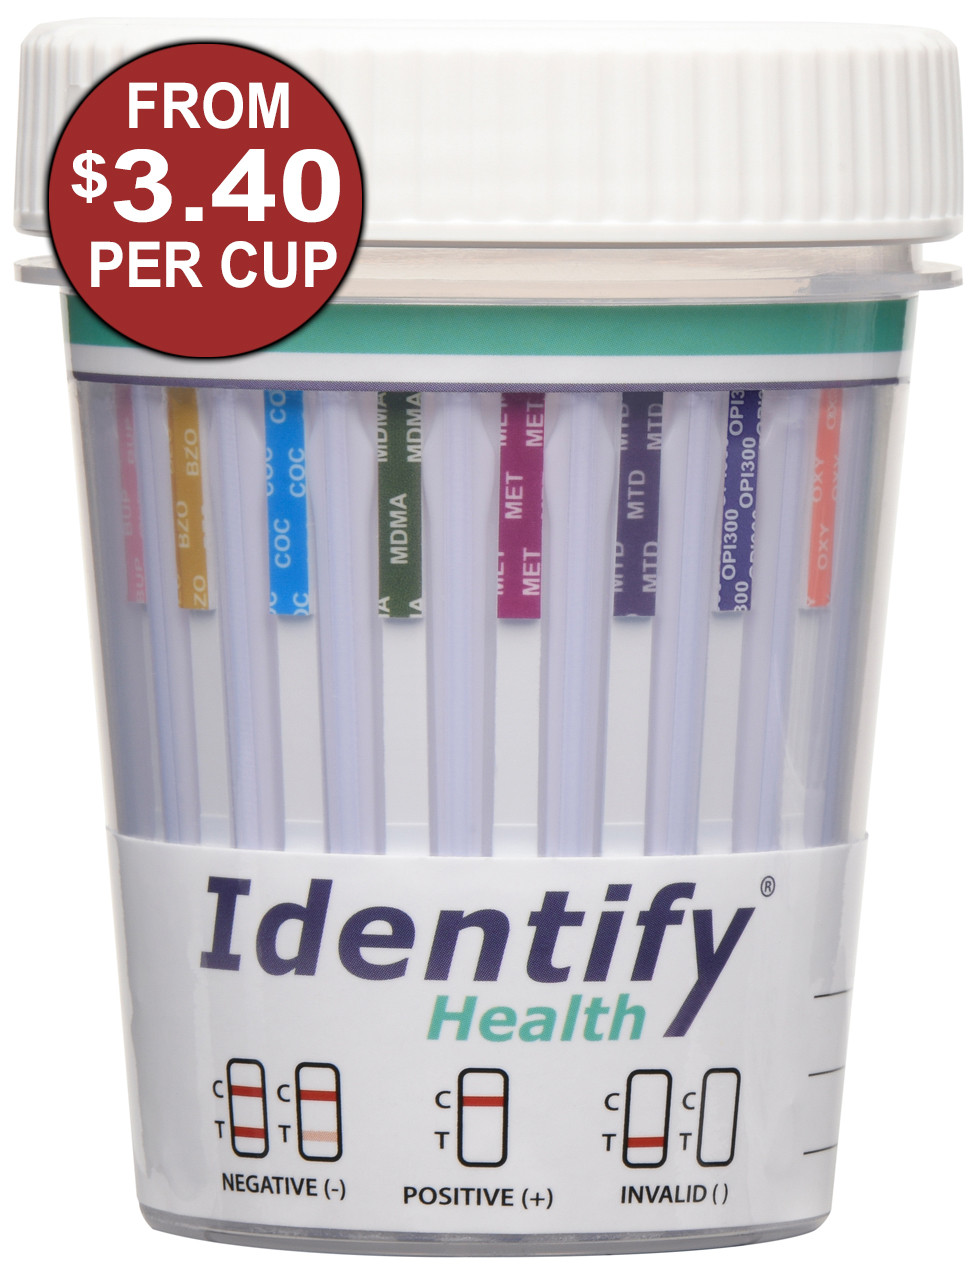 https://cdn11.bigcommerce.com/s-svmxqq8b/images/stencil/1280x1280/products/33/1893/identify-health-12-panel-drug-test-cup-pcp-ID-H12-1-1280x979-340-discount-sale-AUGUST-2023-ID__27717.1691609228.jpg?c=2